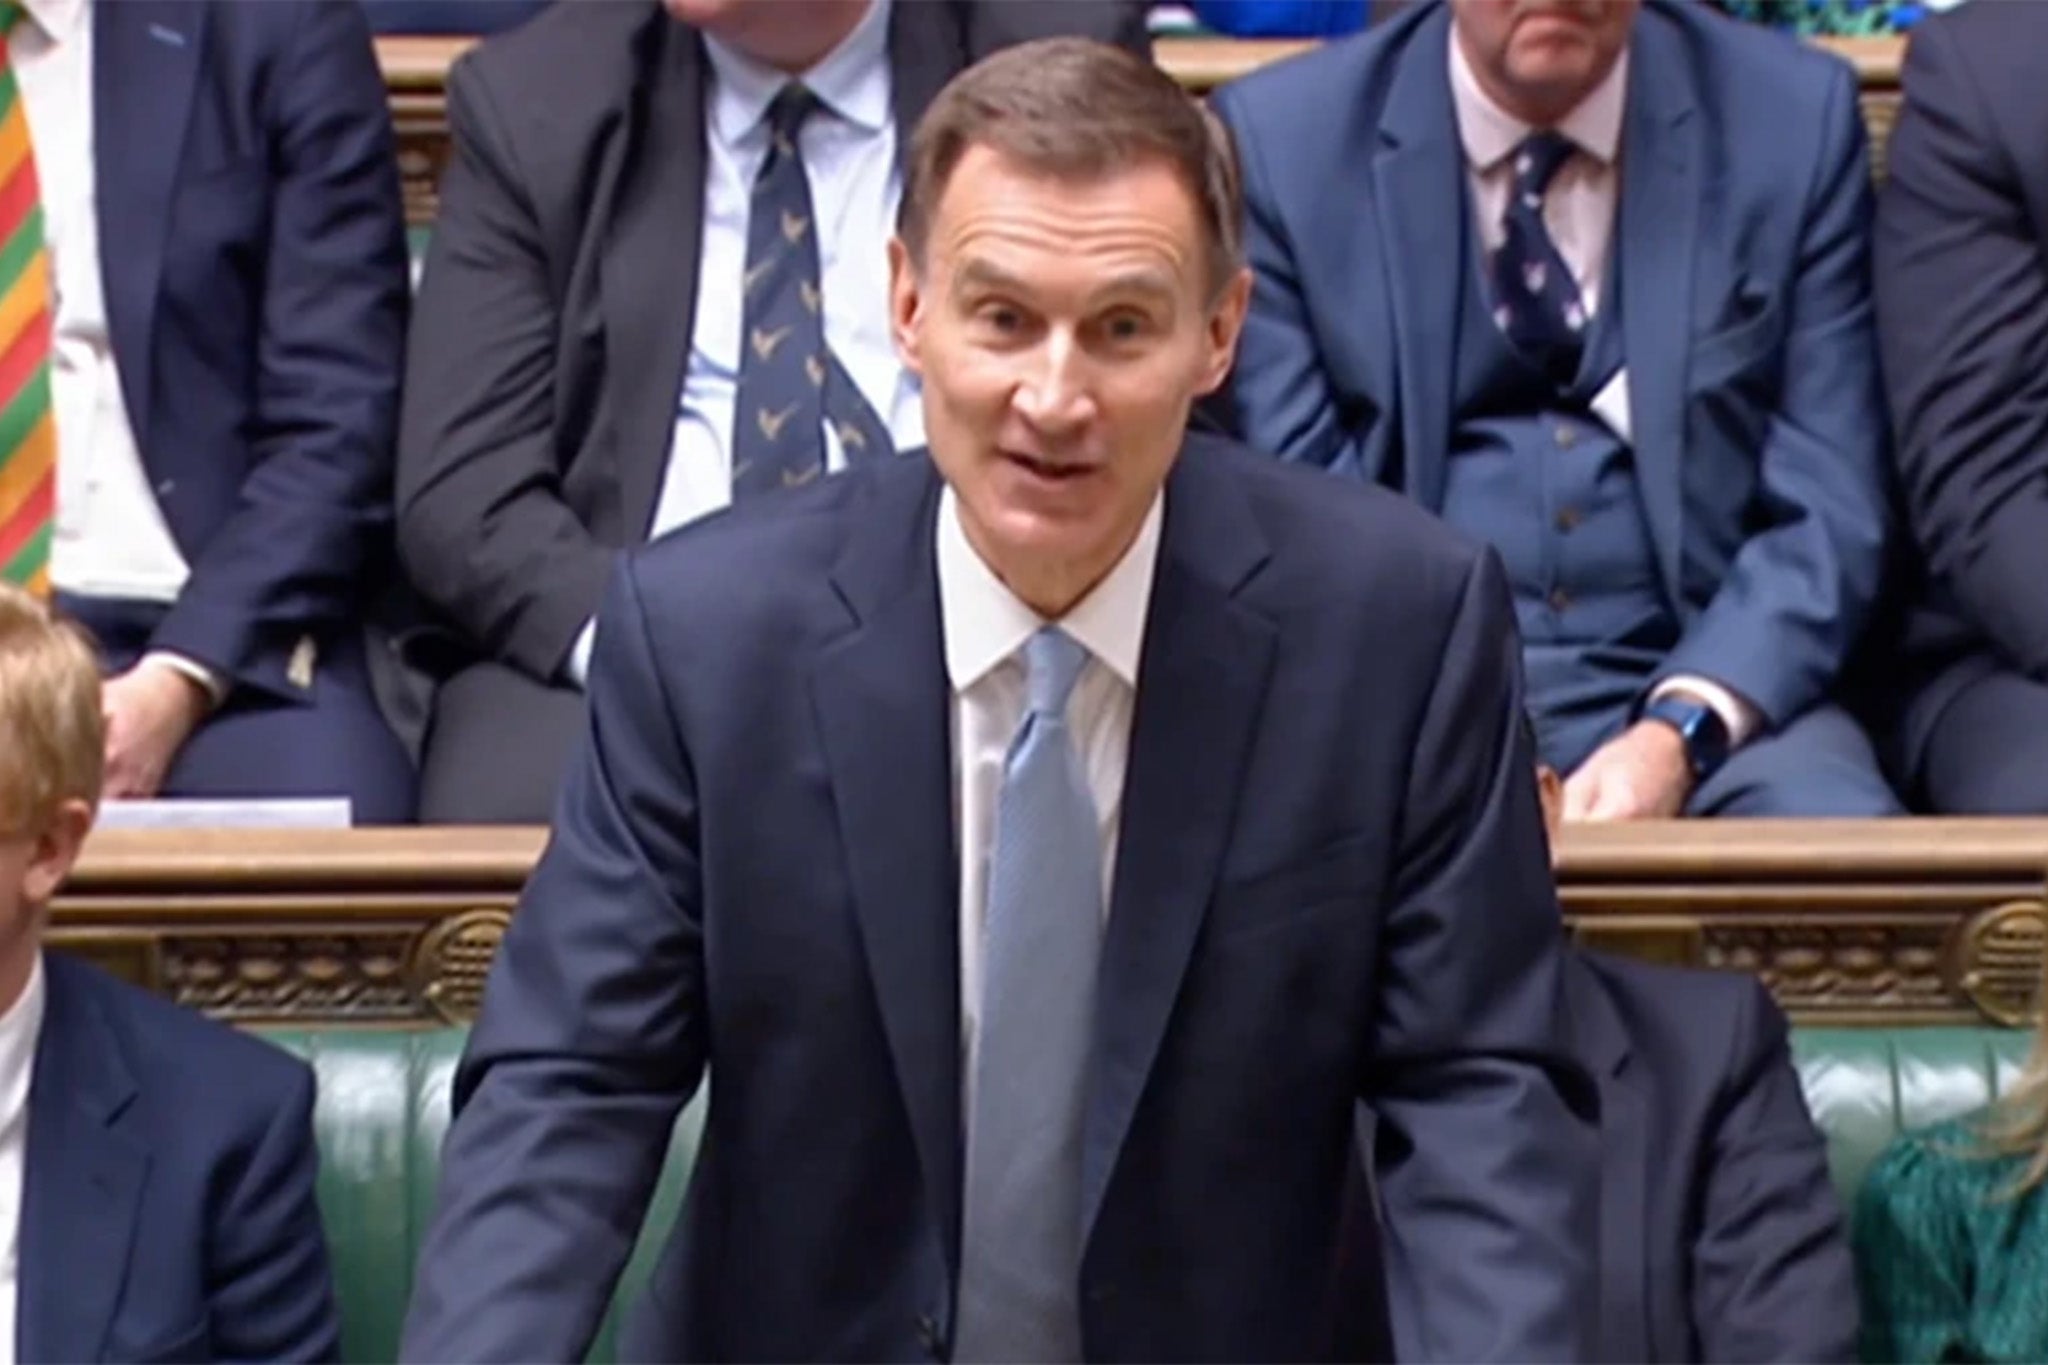 Chancellor of the Exchequer Jeremy Hunt delivering his Budget to the House of Commons in London on Wednesday